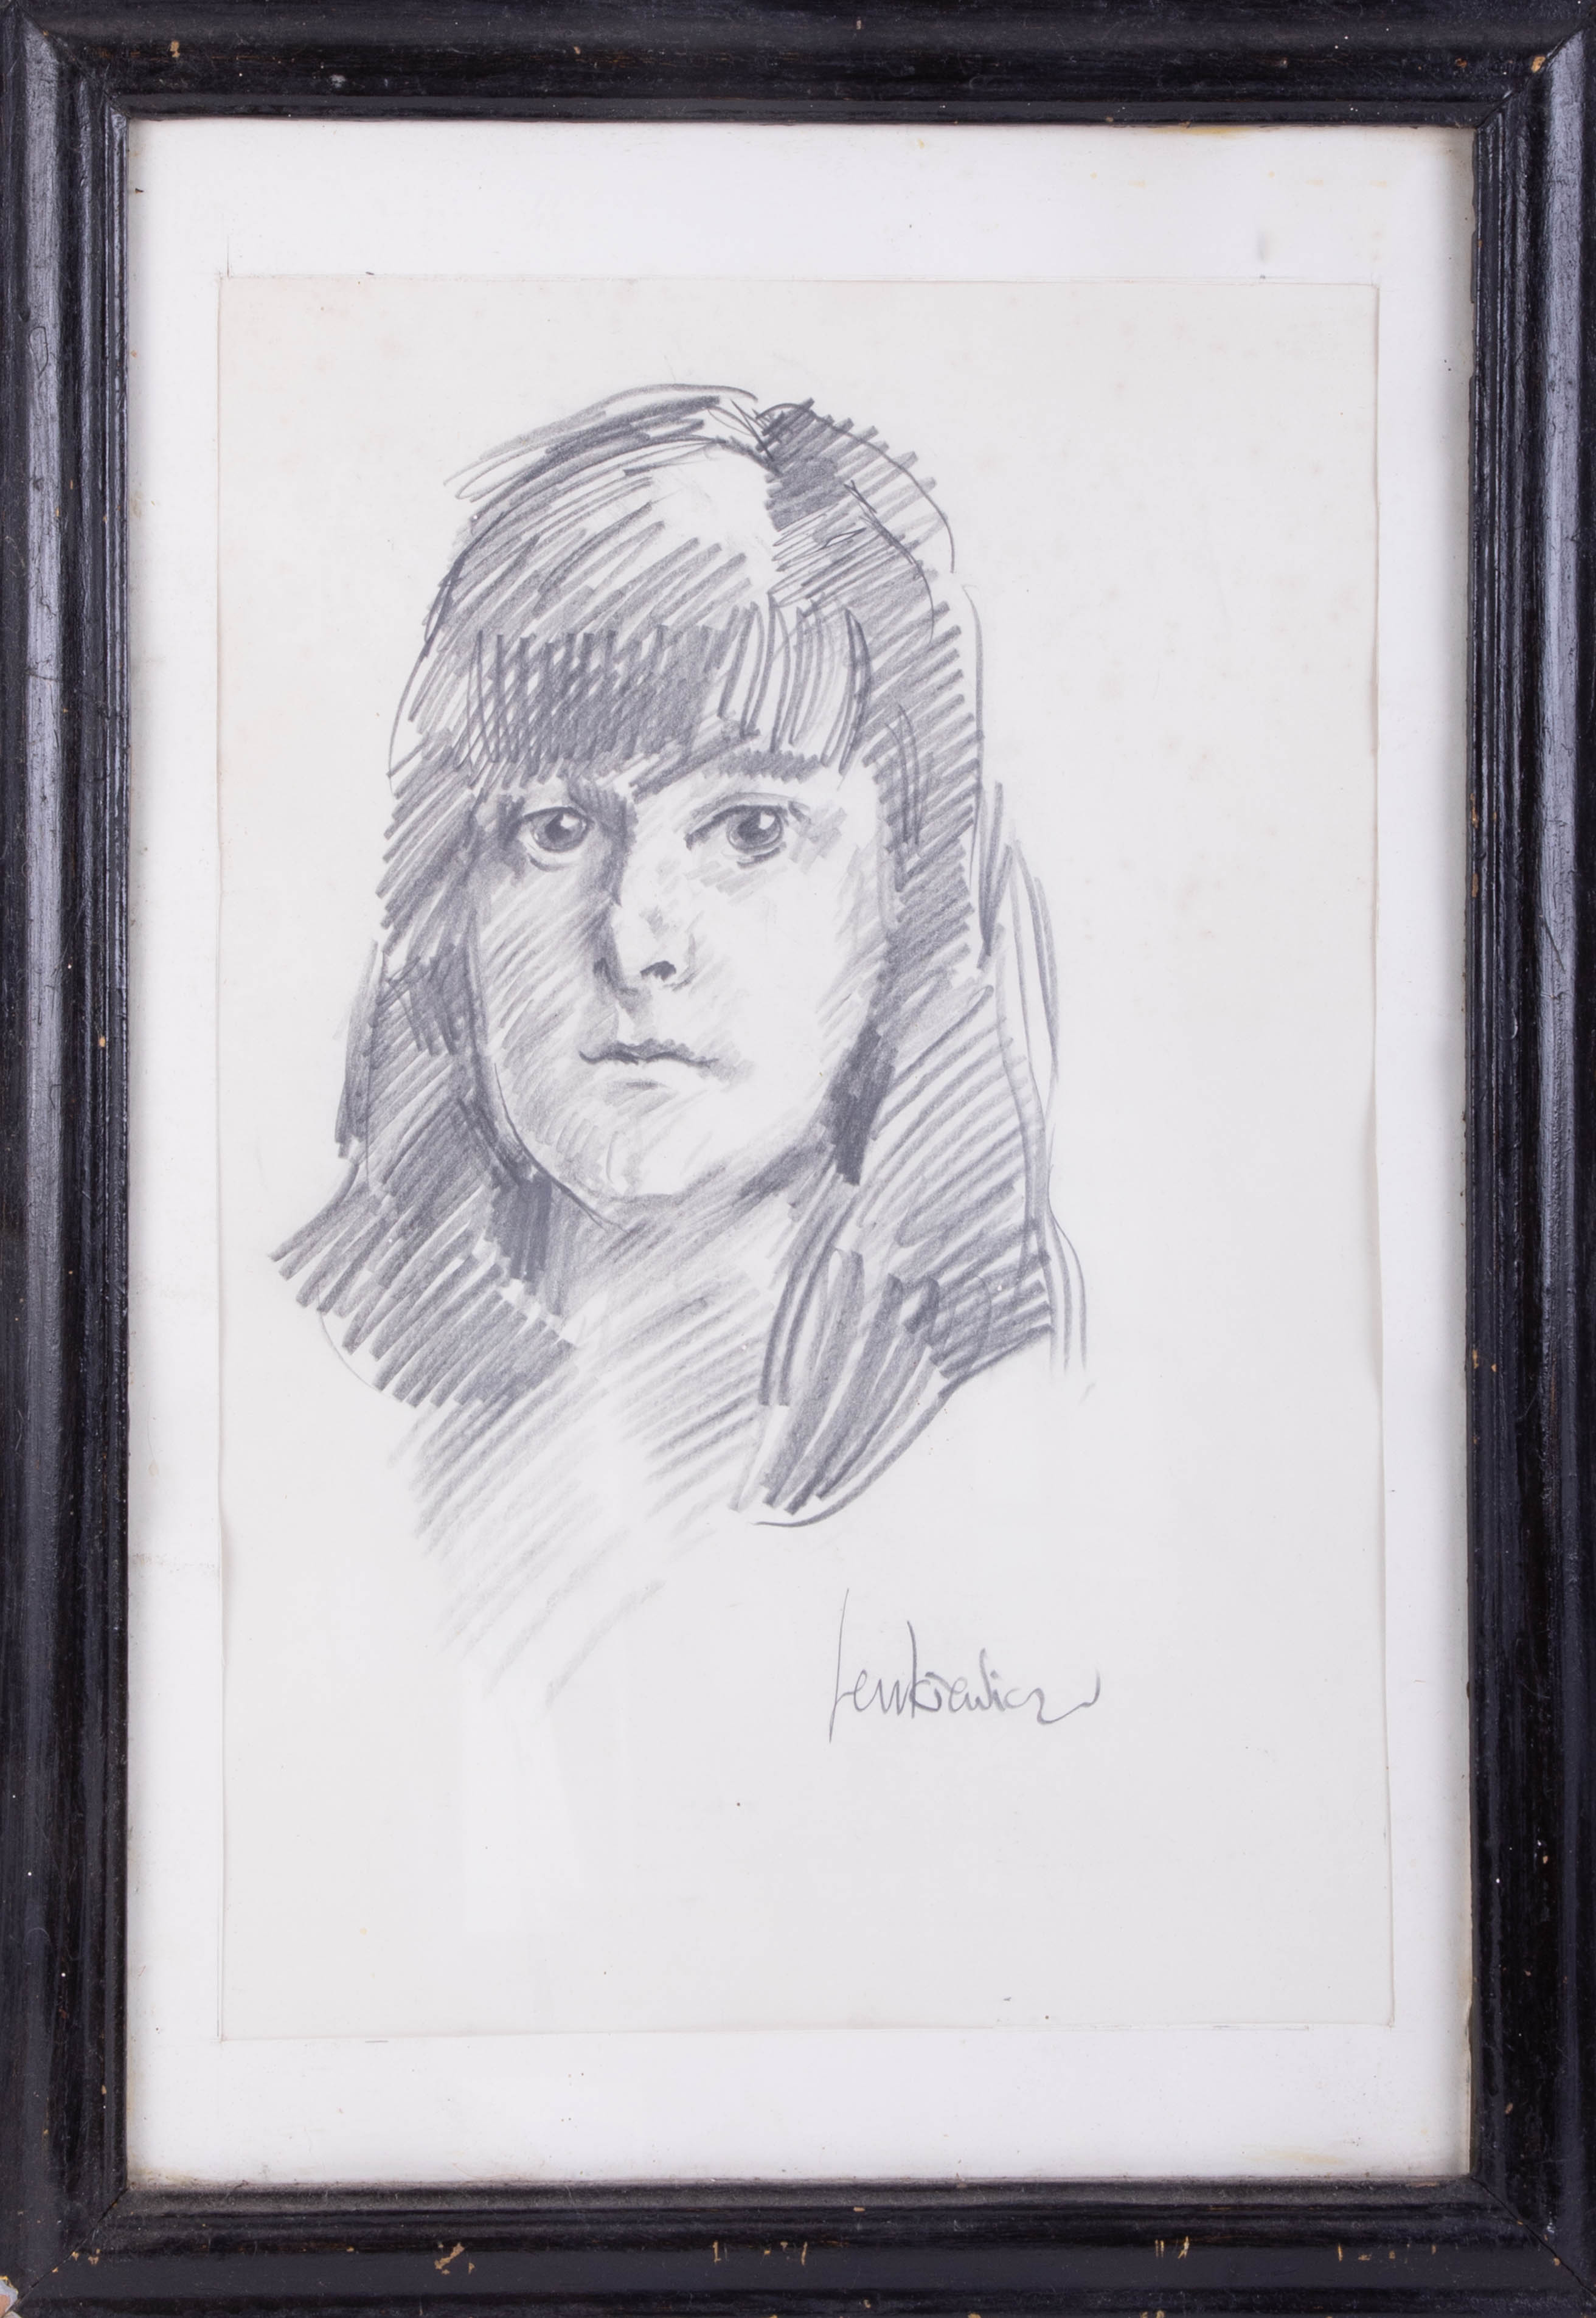 Robert Lenkiewicz, early pencil sketch, 'Young Girl', signed, 38cm x 26cm, framed and glazed.